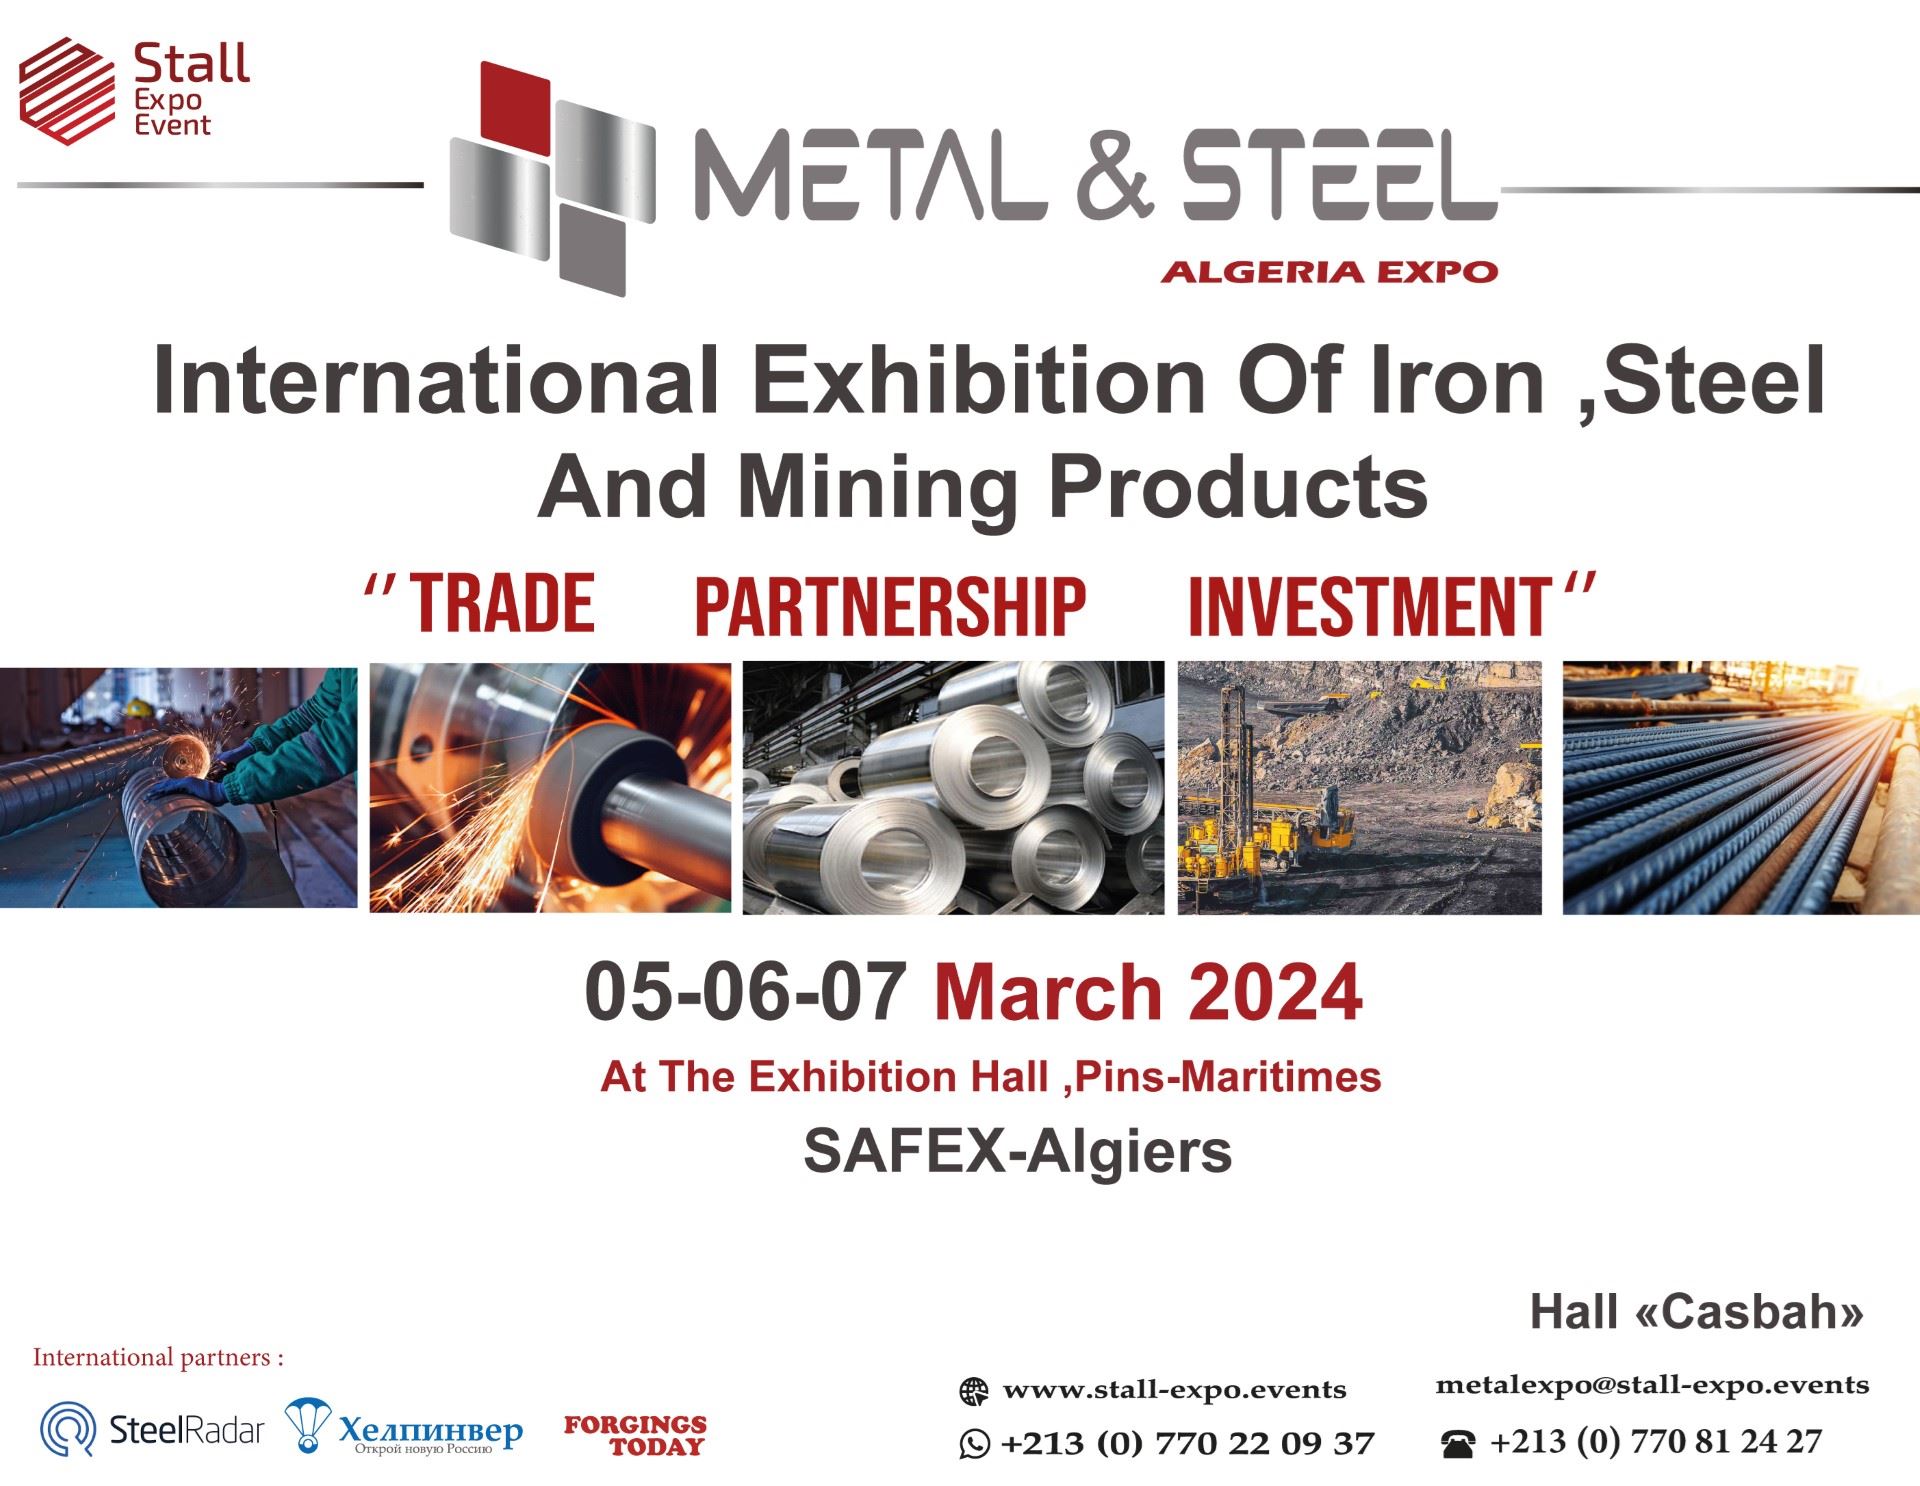 Metal & Steel Algeria Exhibition will take place on March 5-7, 2024